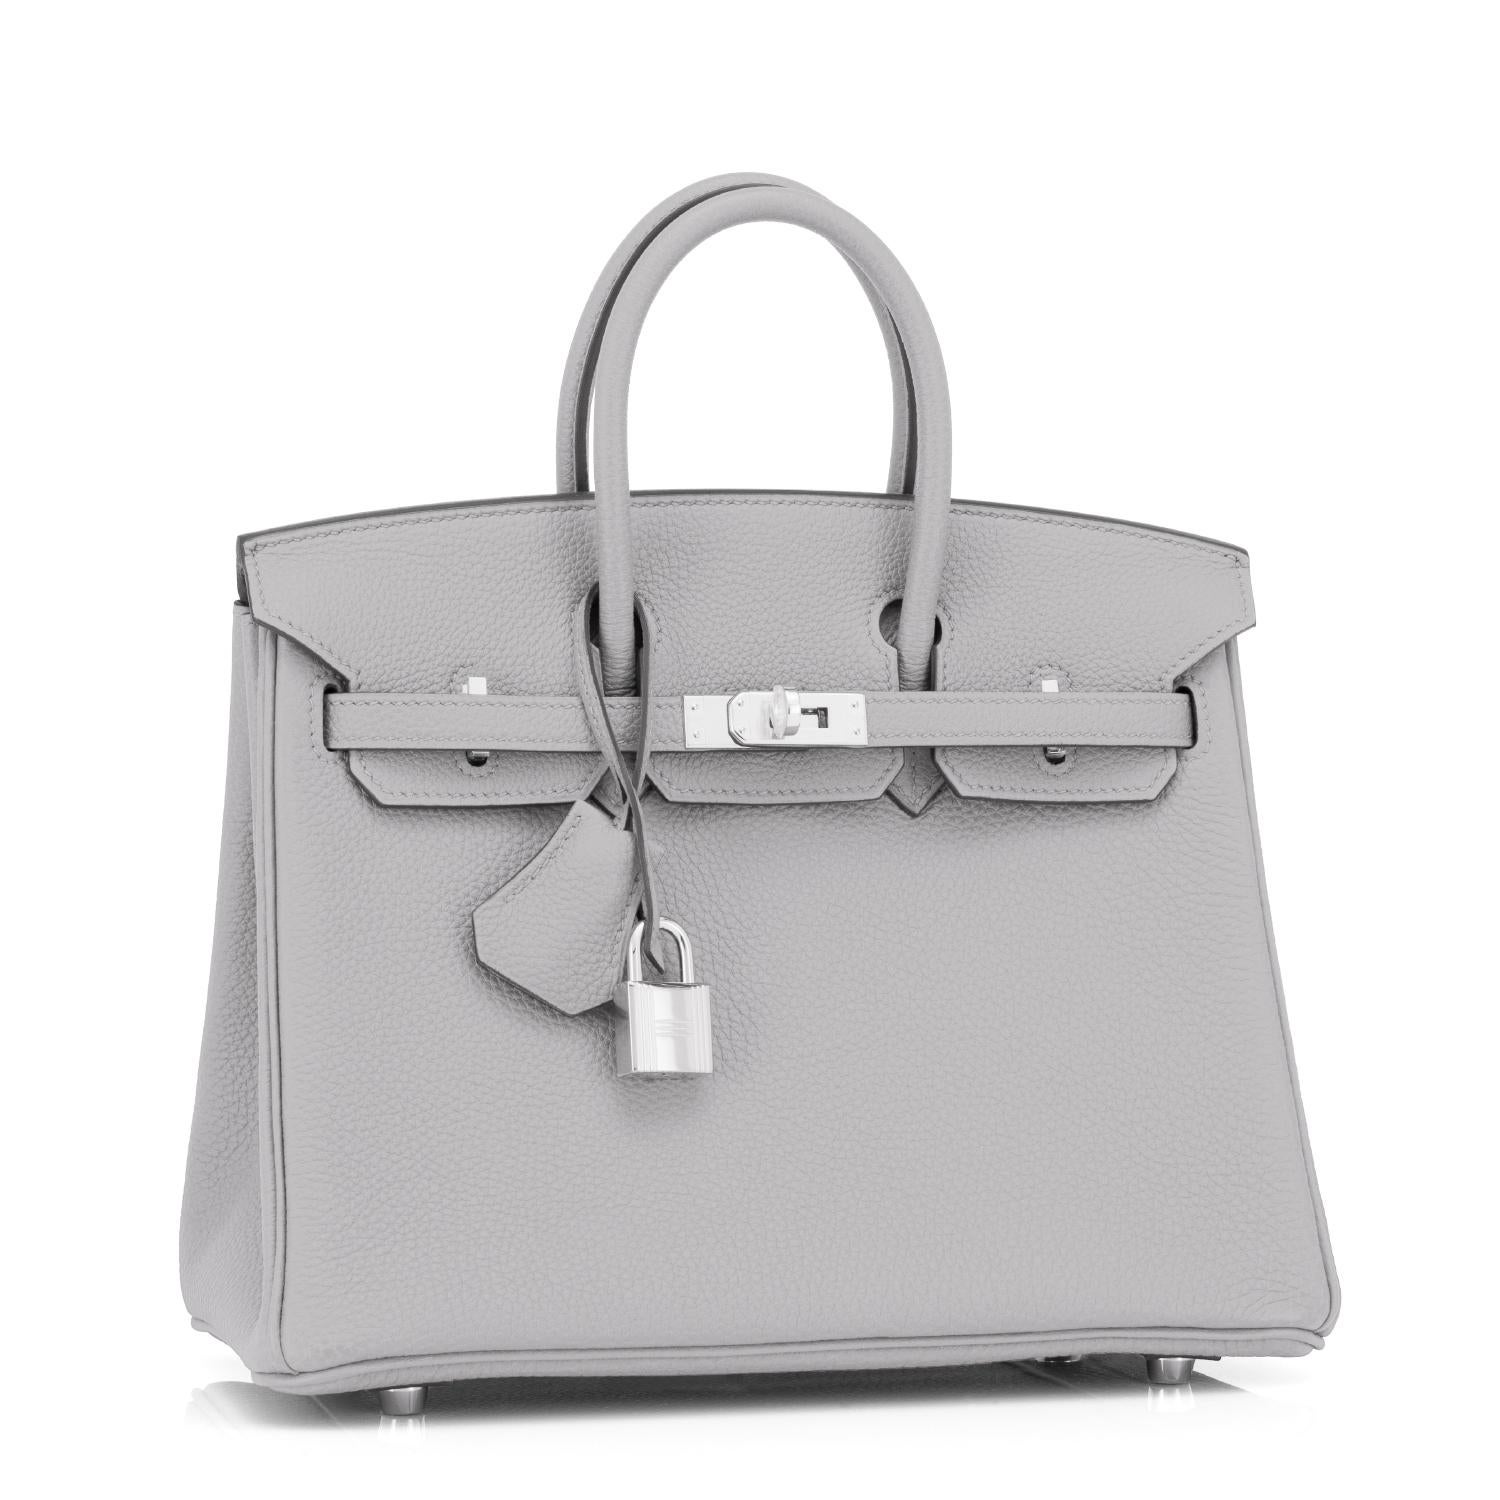 Hermes Birkin 25cm Gris Mouette Togo Bag Palladium Gray Birkin NEW RARE
Extremely rare find; long discontinued Gris Mouette in Pristine Condition!
New or Never Worn. Pristine Condition (with plastic on hardware) 
Comes full set with keys, lock,